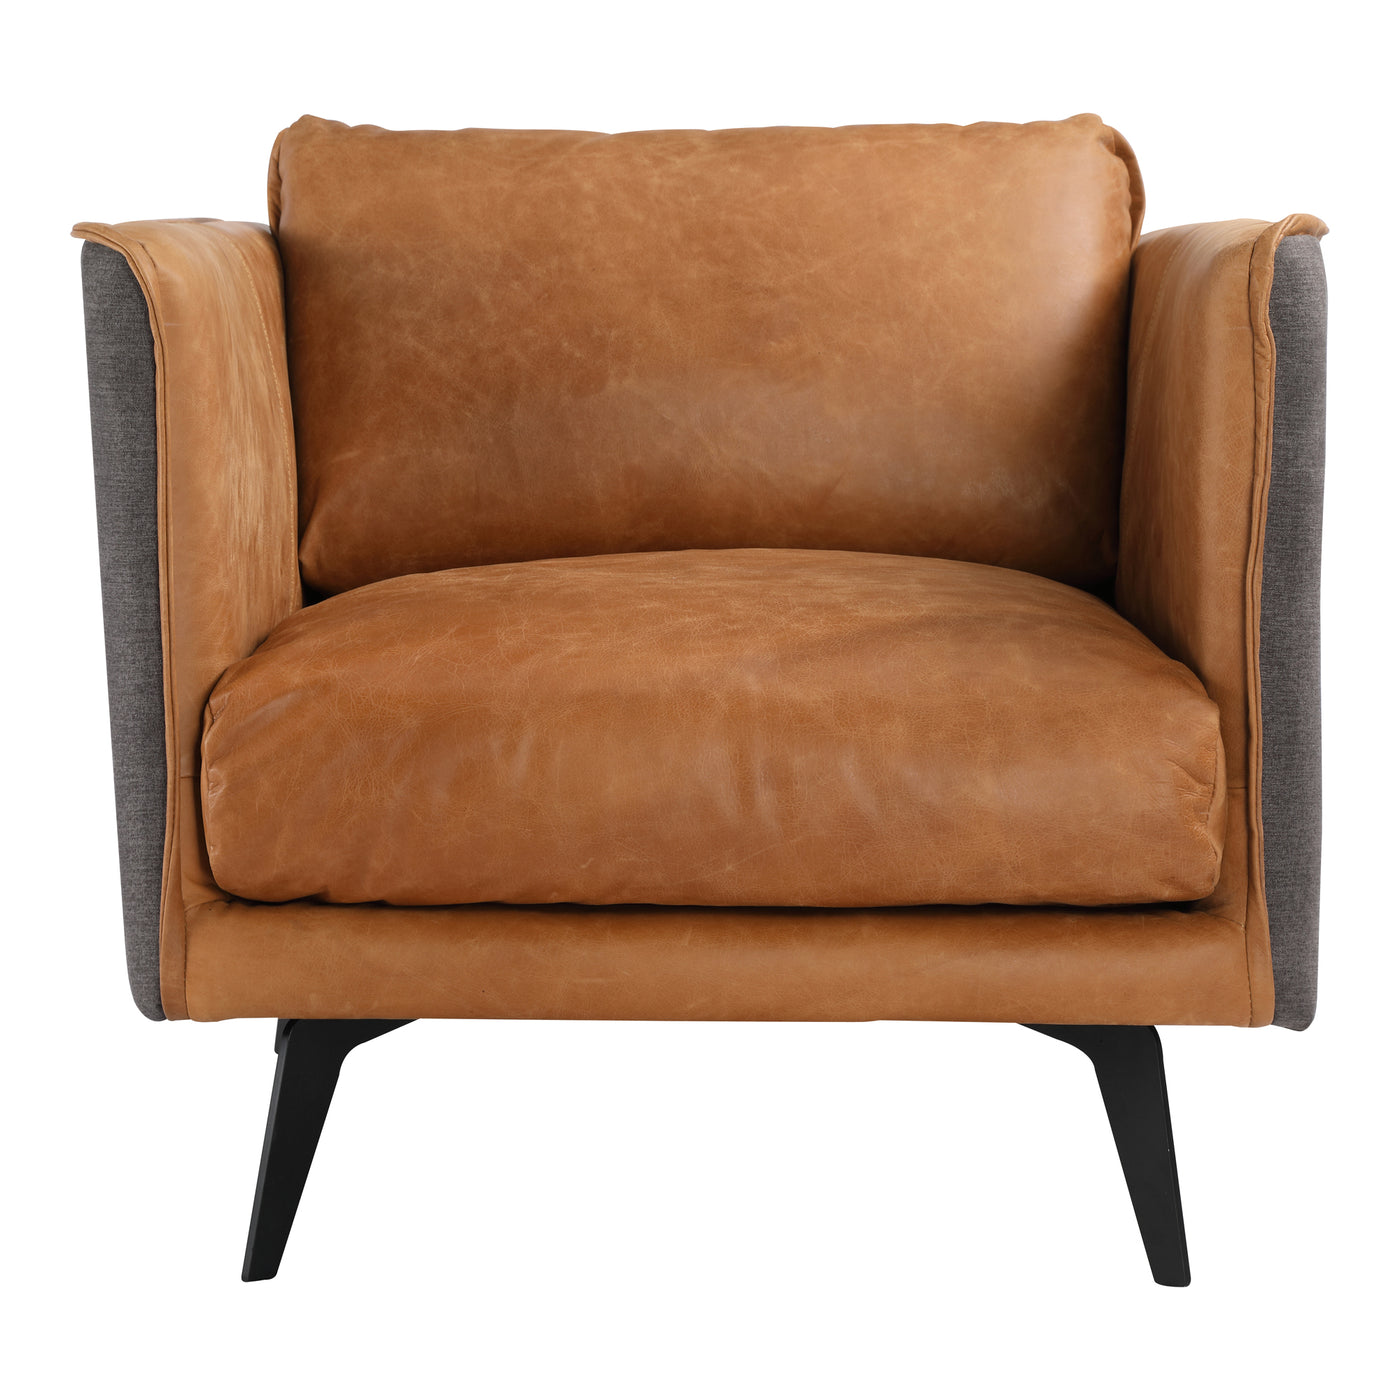 The Messina is a cozy lounge chair that your guests will want to sit in for hours. Short iron legs boast mid-century desig...